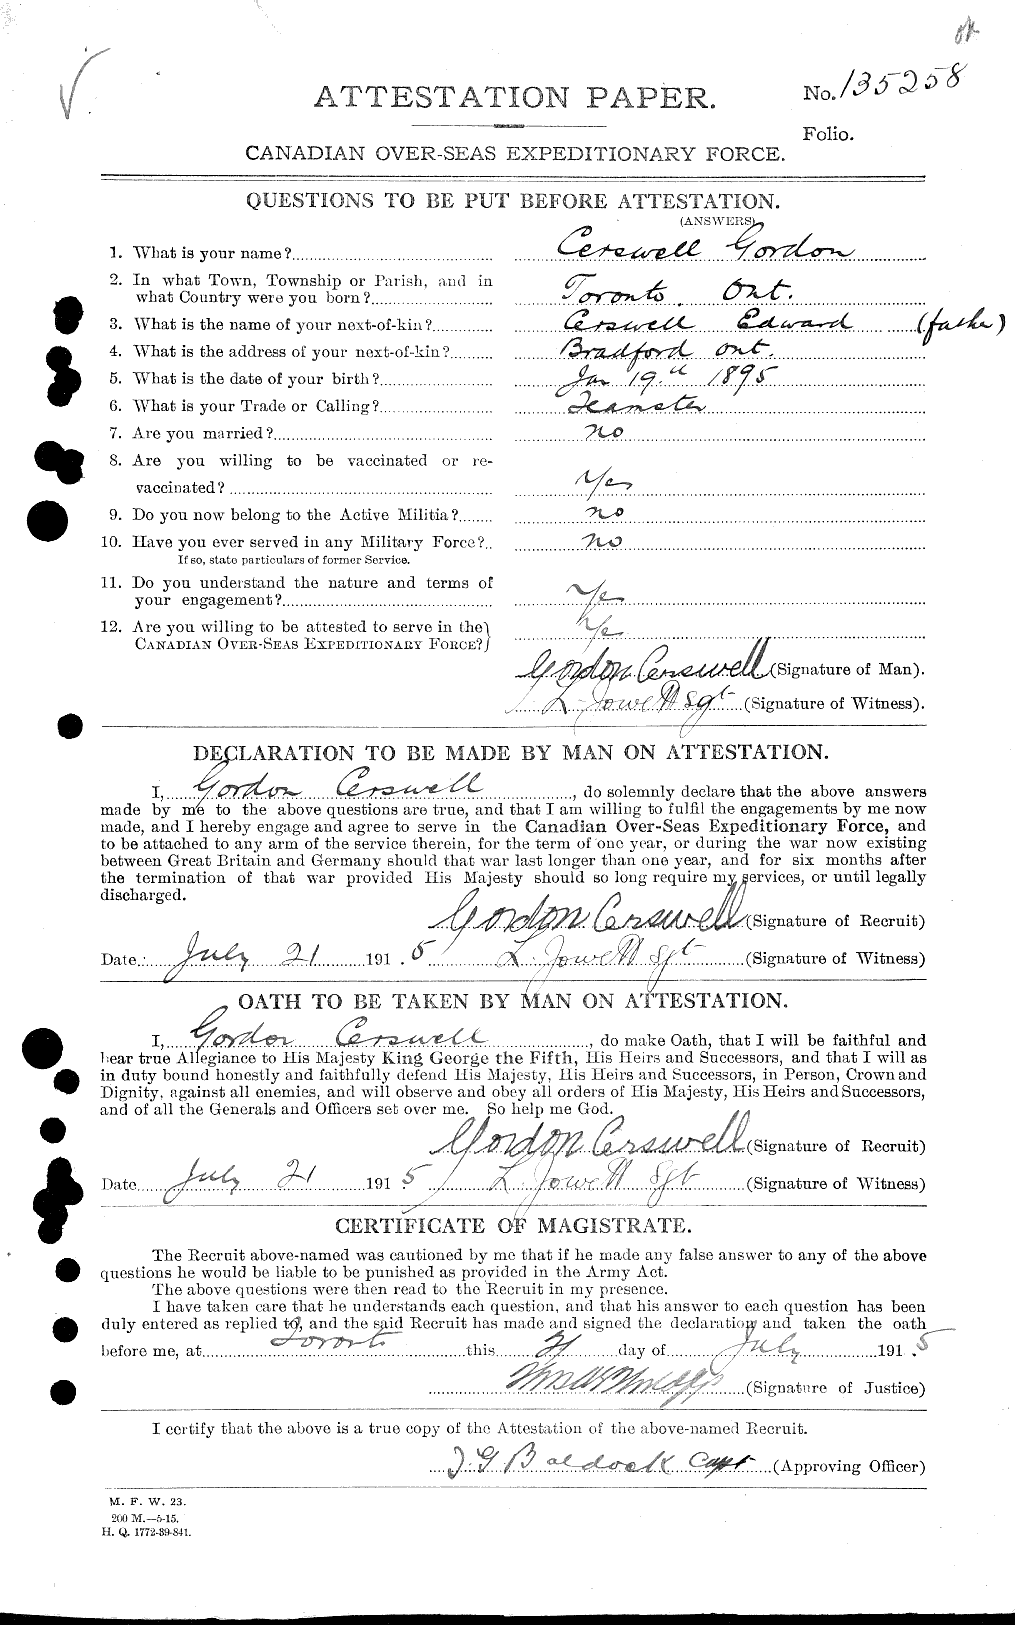 Personnel Records of the First World War - CEF 007823a